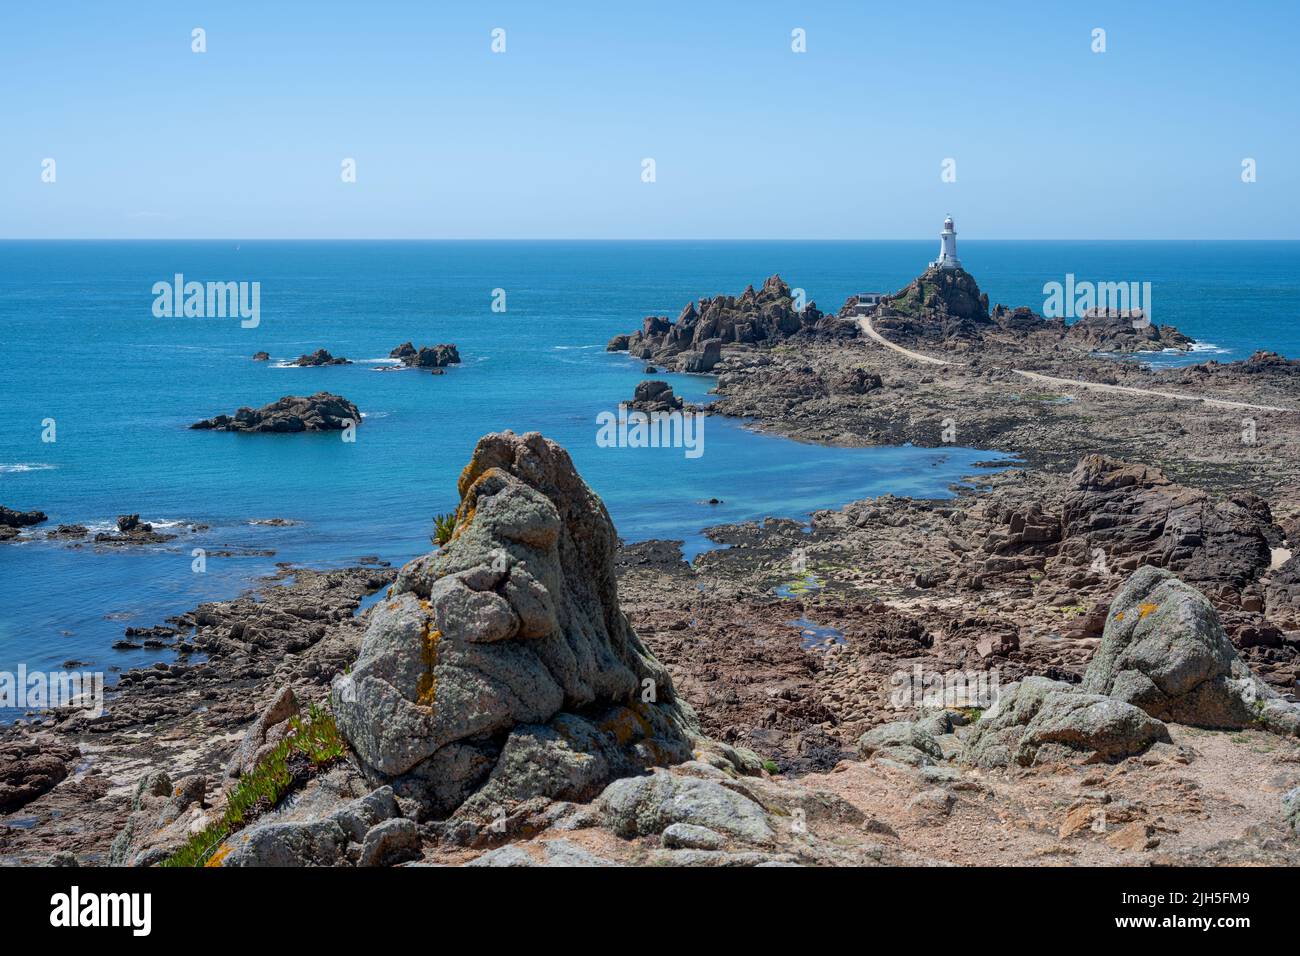 La Corbiere lighthouse on the headland of St Brelade in the south-west of the British Crown Dependency of Jersey, Channel Islands, British Isles. Stock Photo